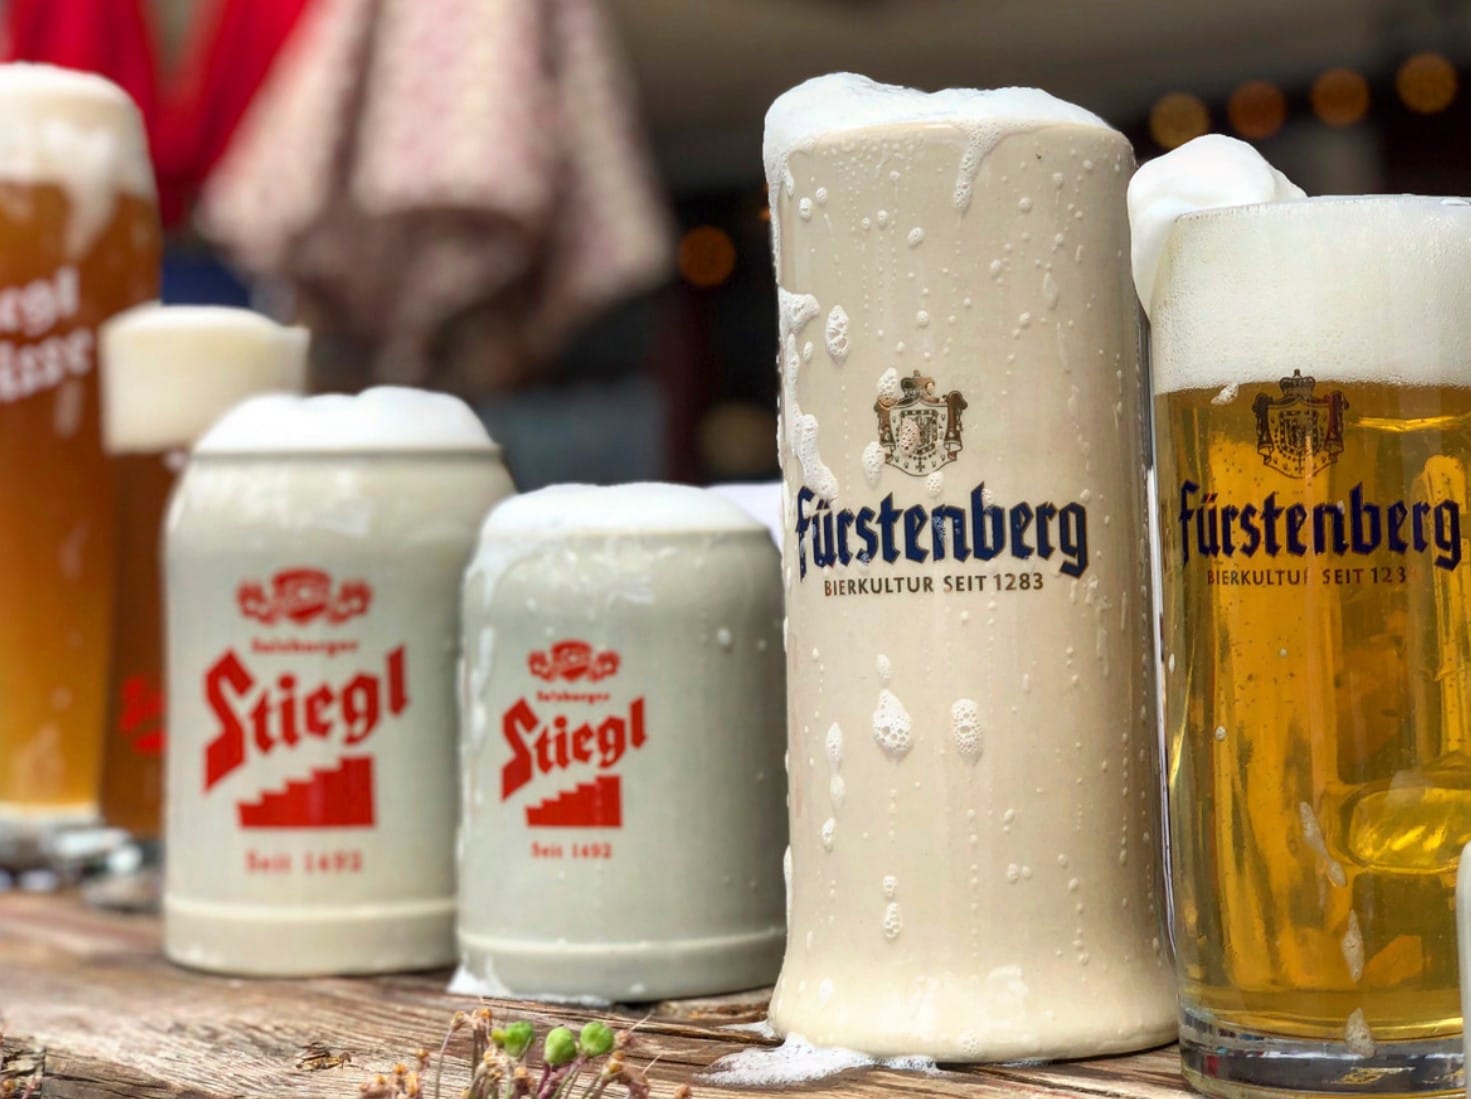 German beer steins sit in a row with frothy foam spattered across the glassware.